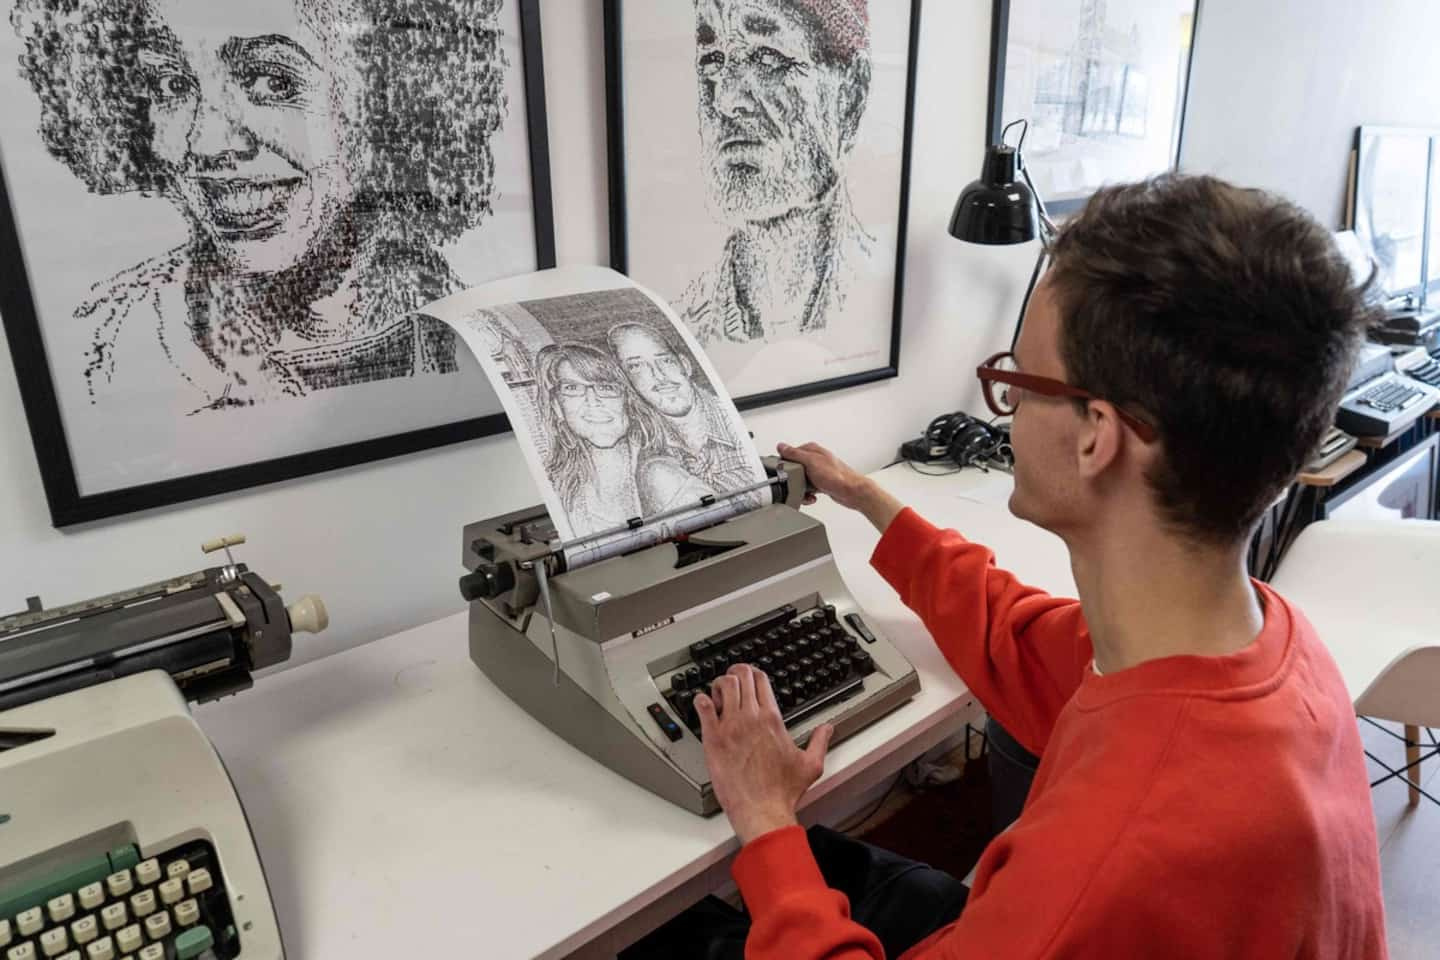 [PHOTOS] He draws portraits and monuments... with typewriters!